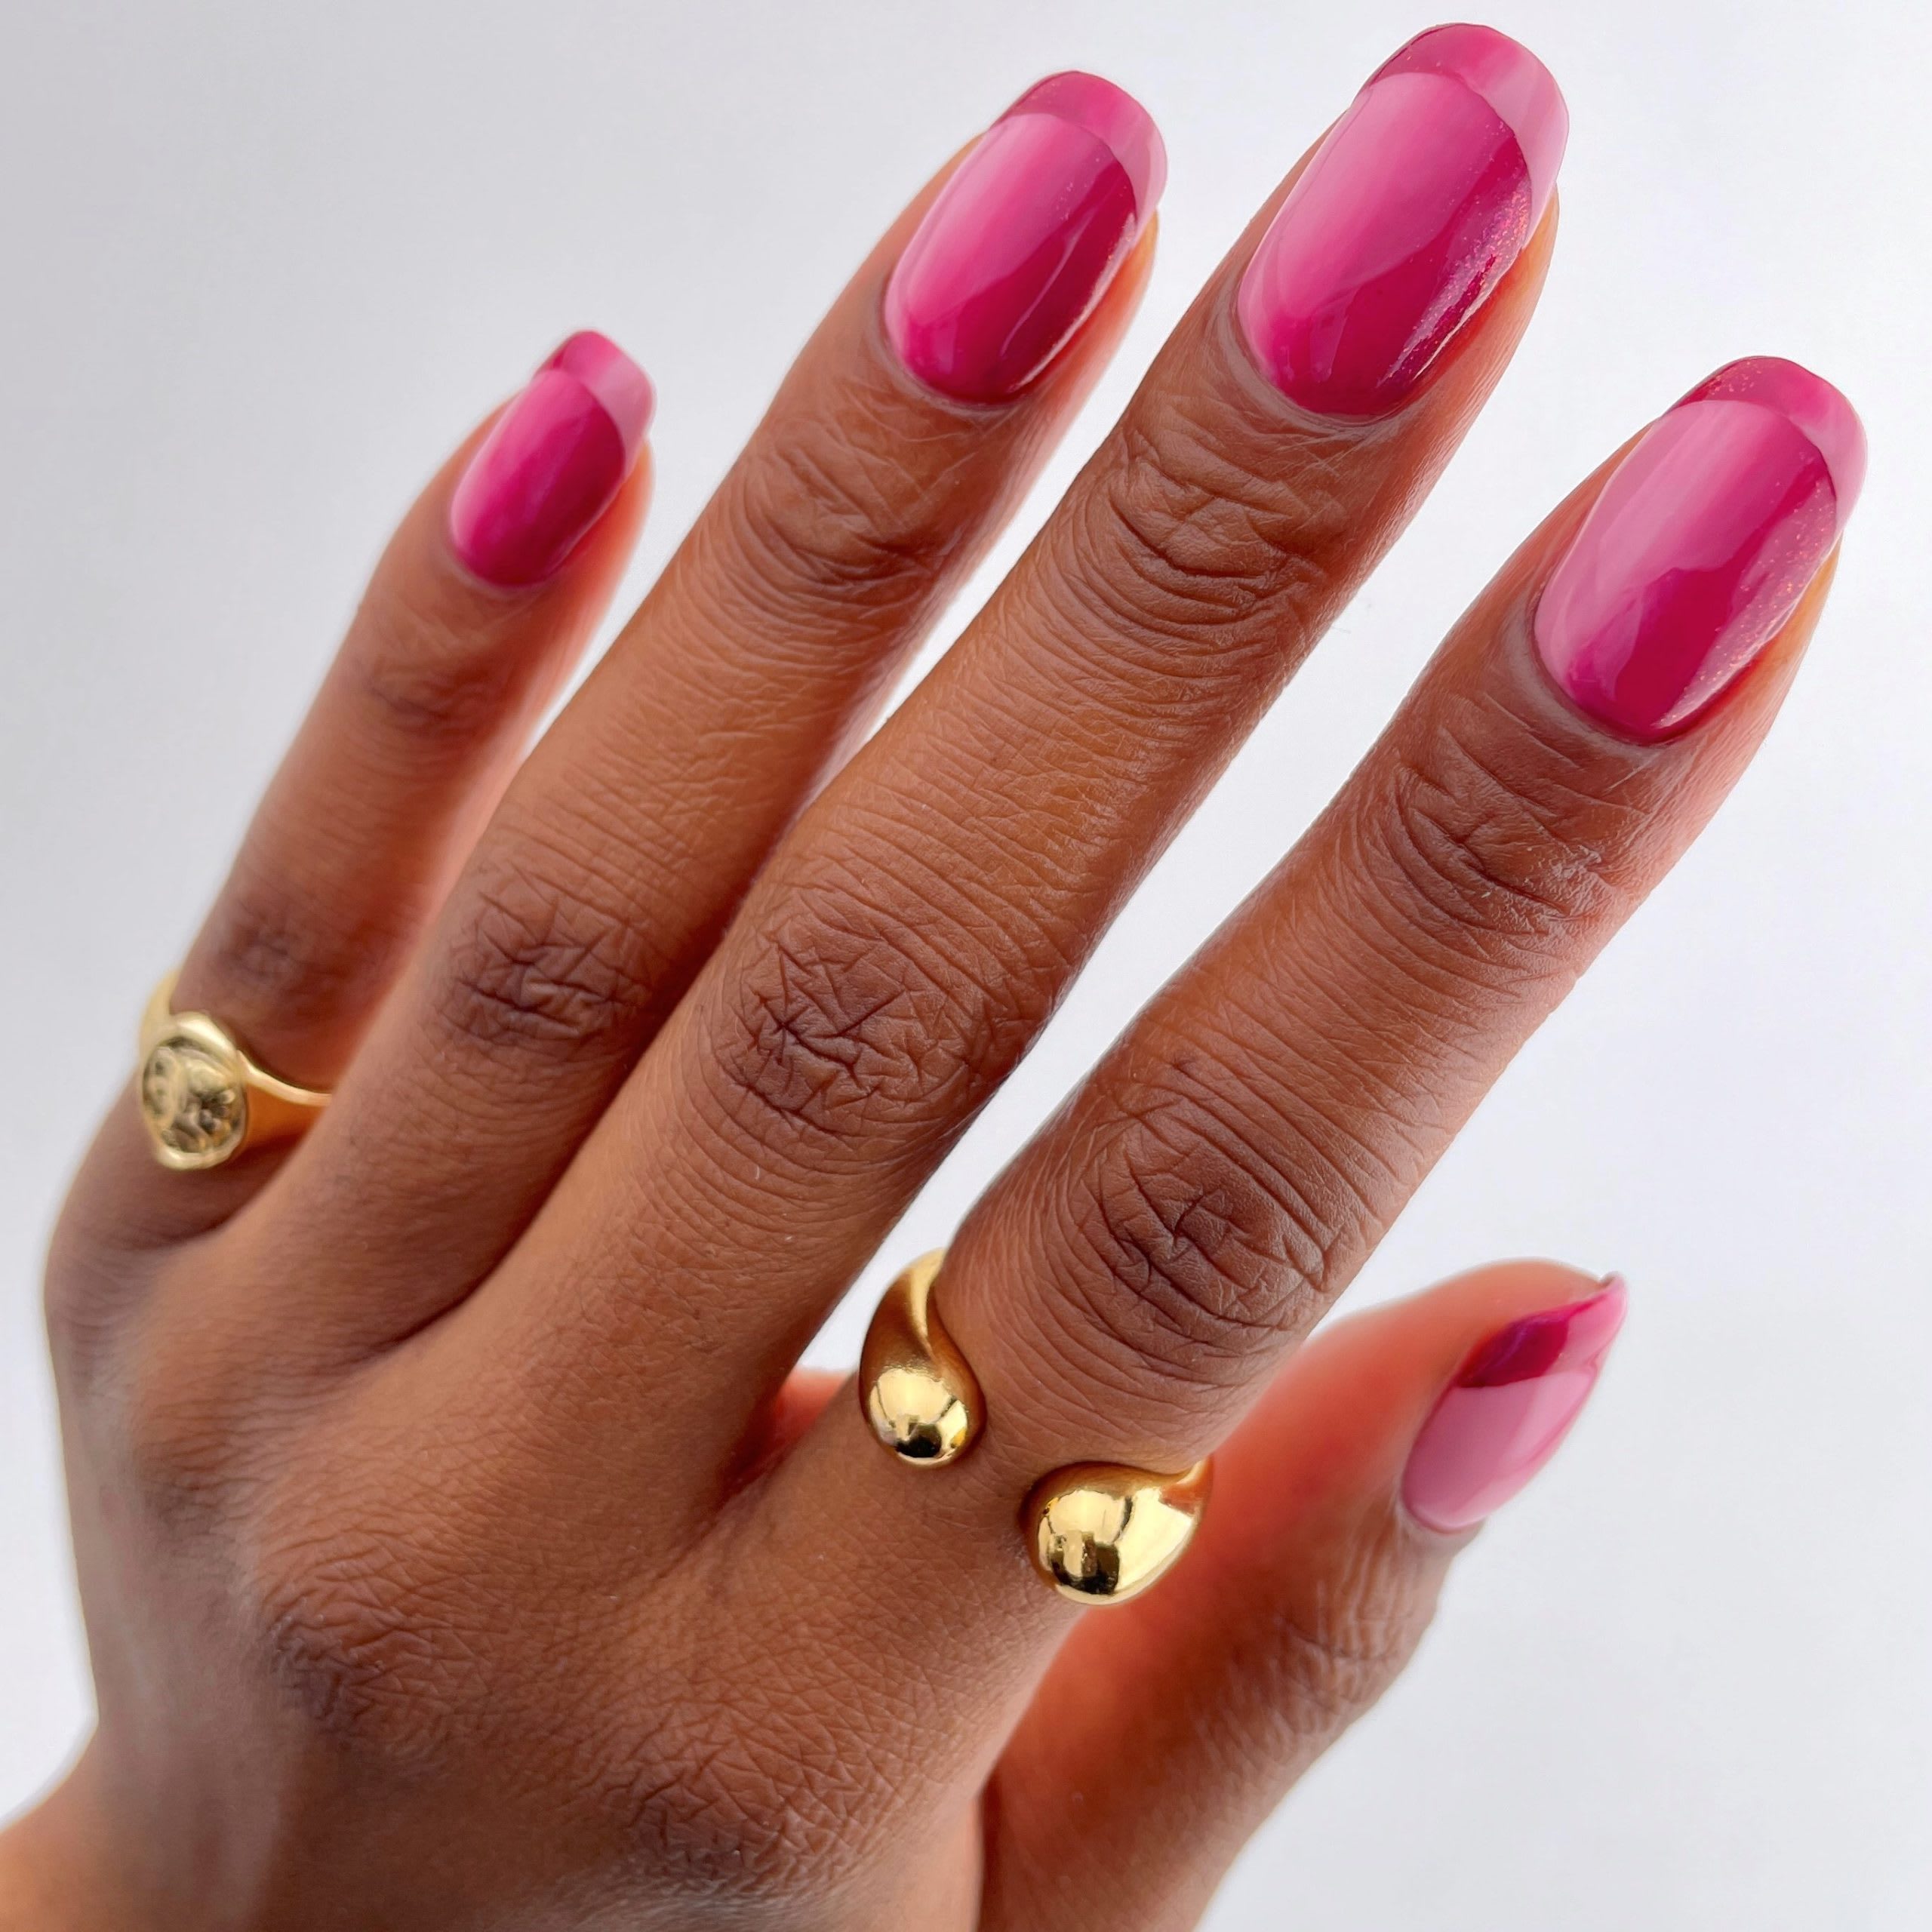 11 Ideas to Spice Up Your At-Home Manicure | The Everygirl